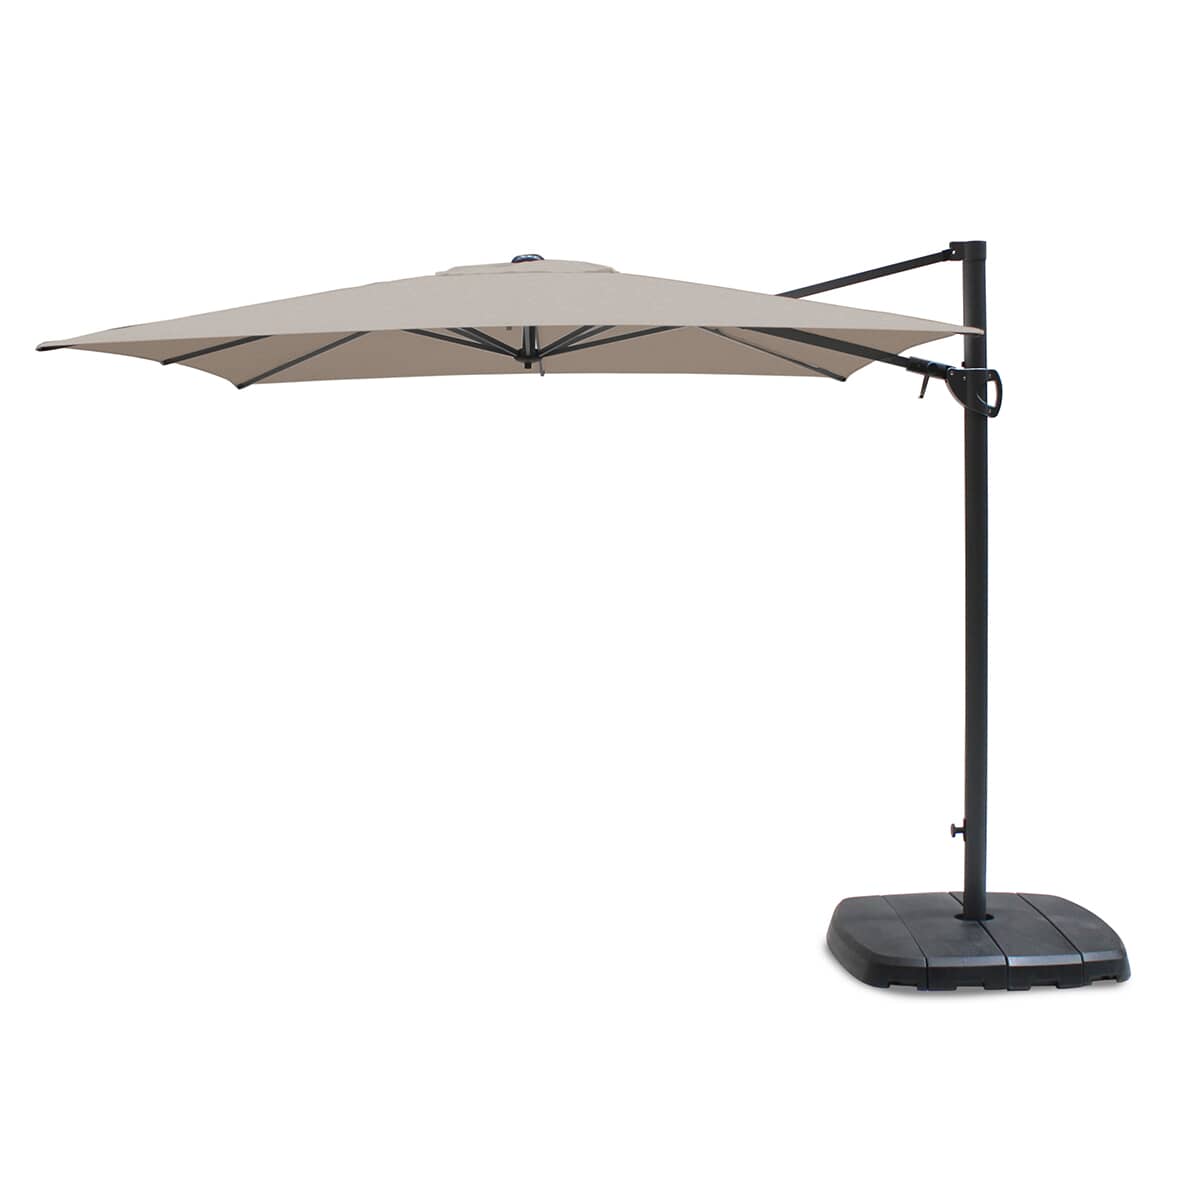 Kettler 2.5m Square Free Arm Parasol - Grey Frame/Stone Canopy with Base